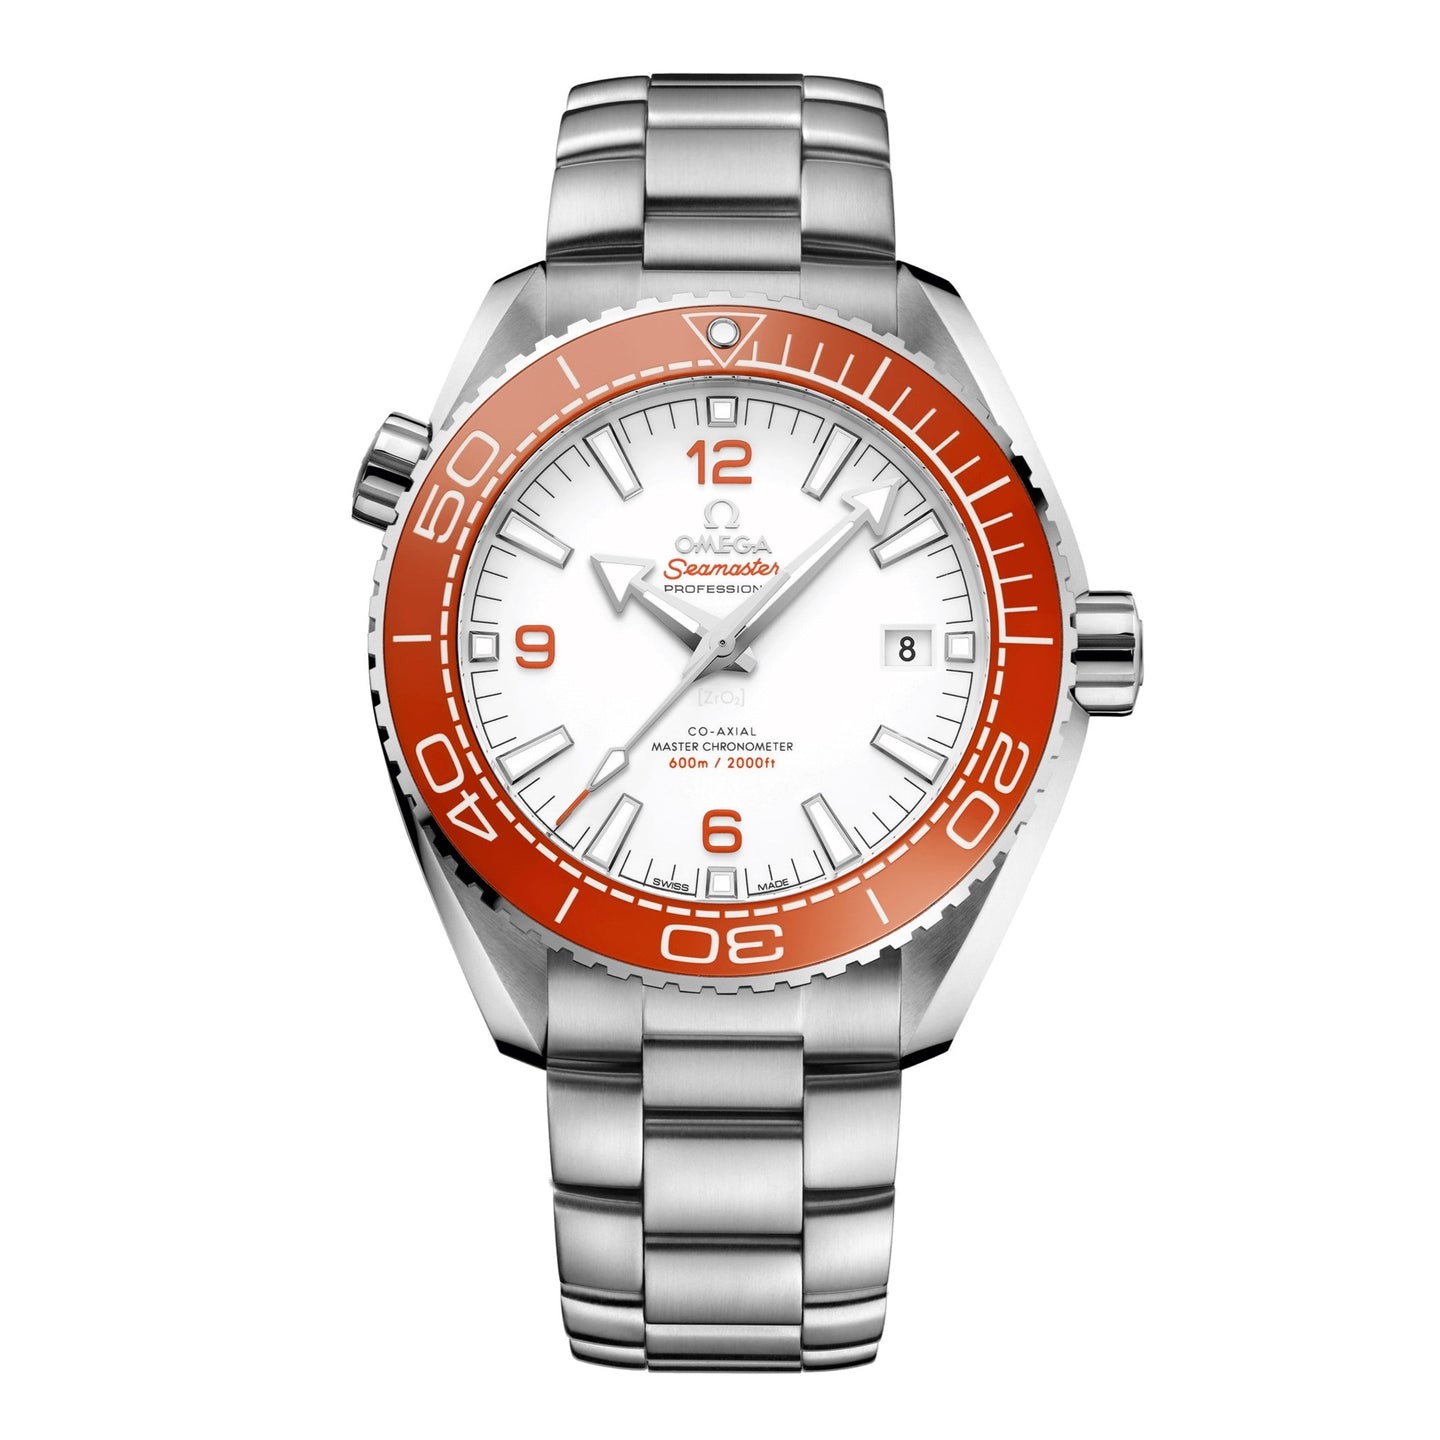 OMEGA Seamaster Planet Ocean 600M OMEGA Co-Axial Master Chronometer 43.5mm with Bracelet